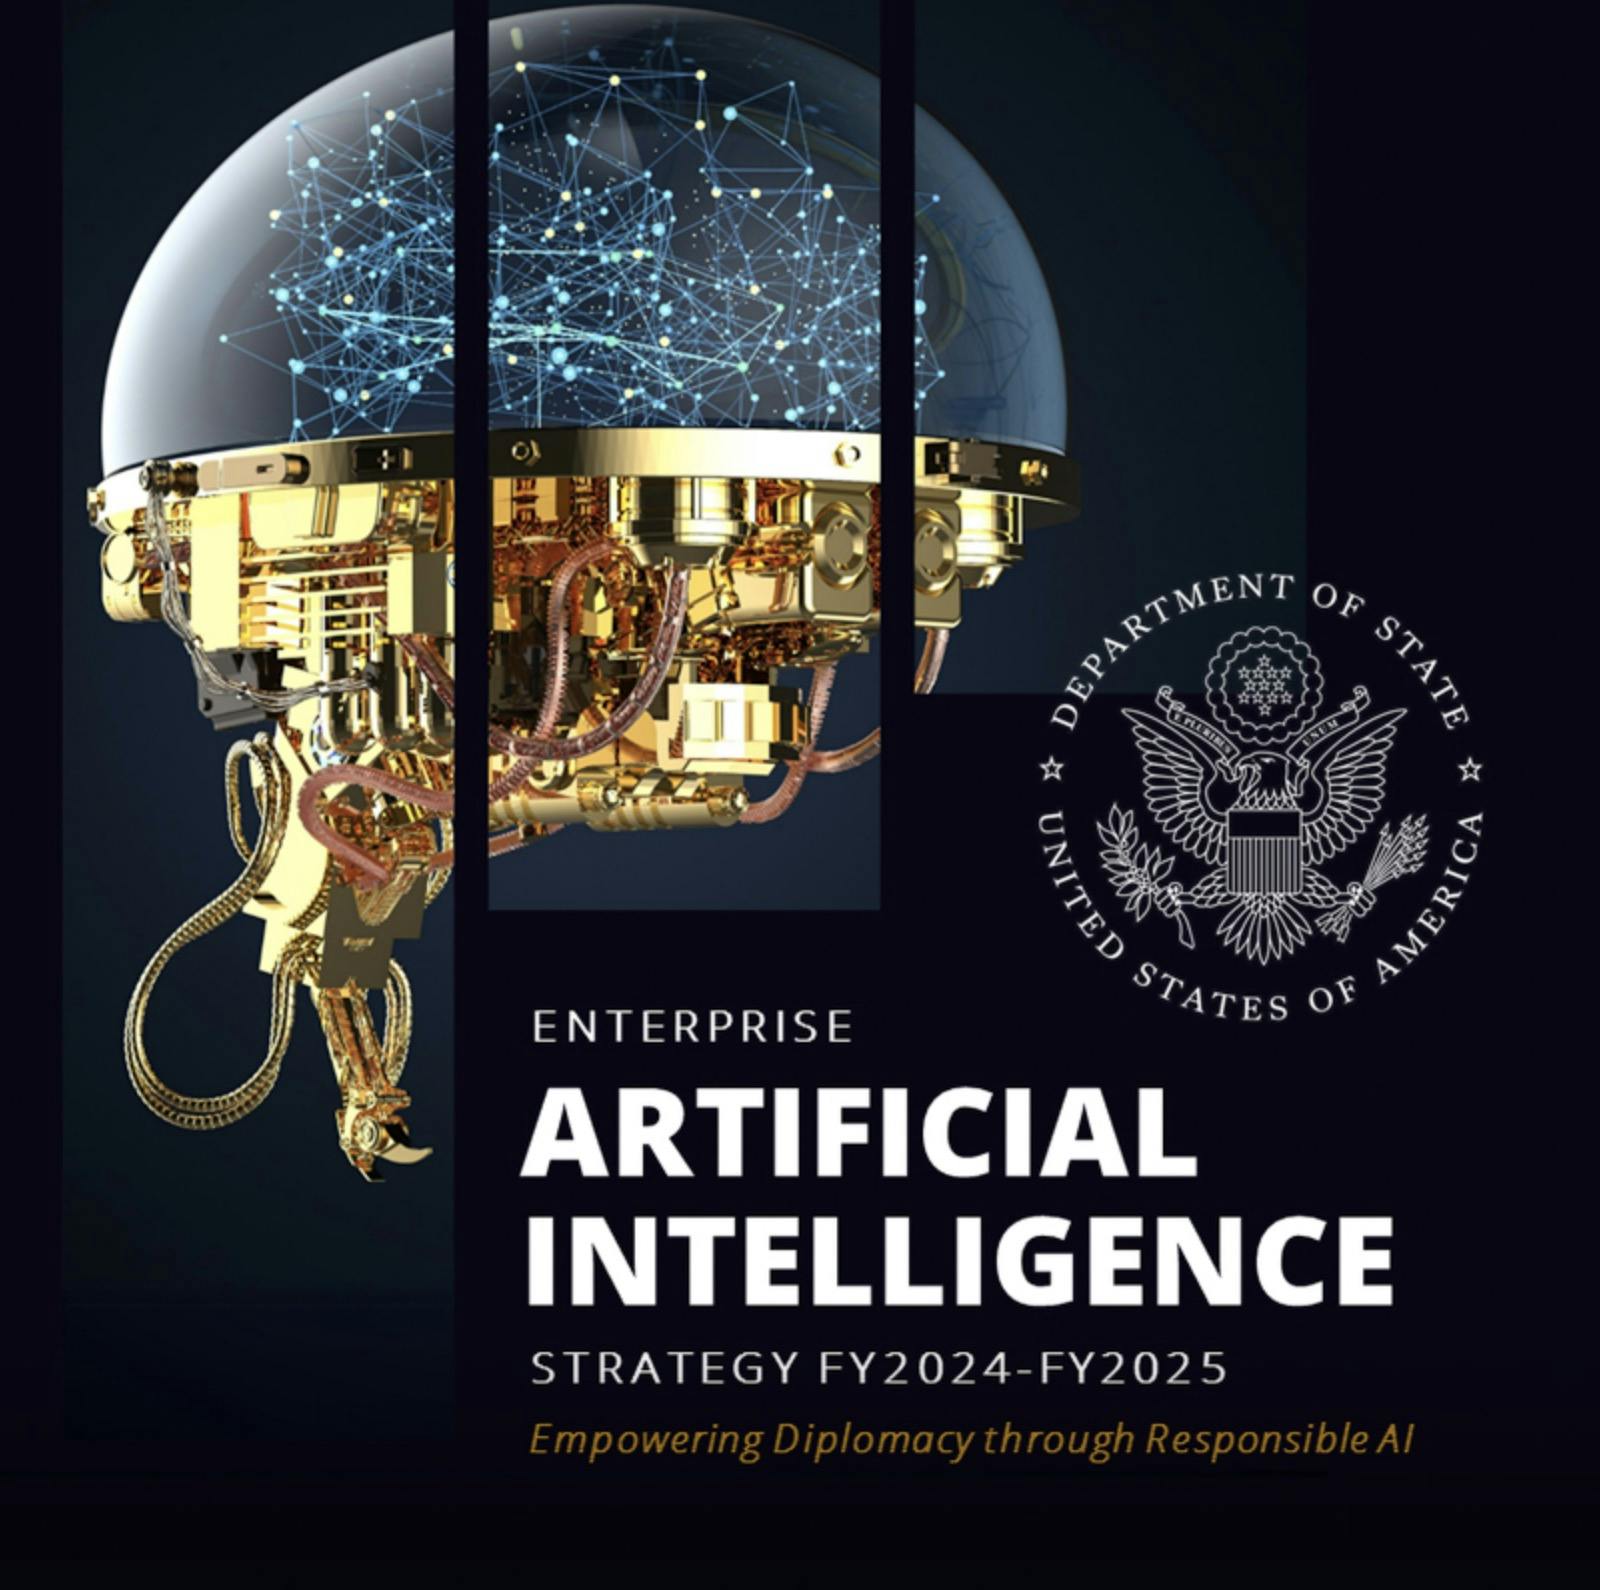 AI + The State Department